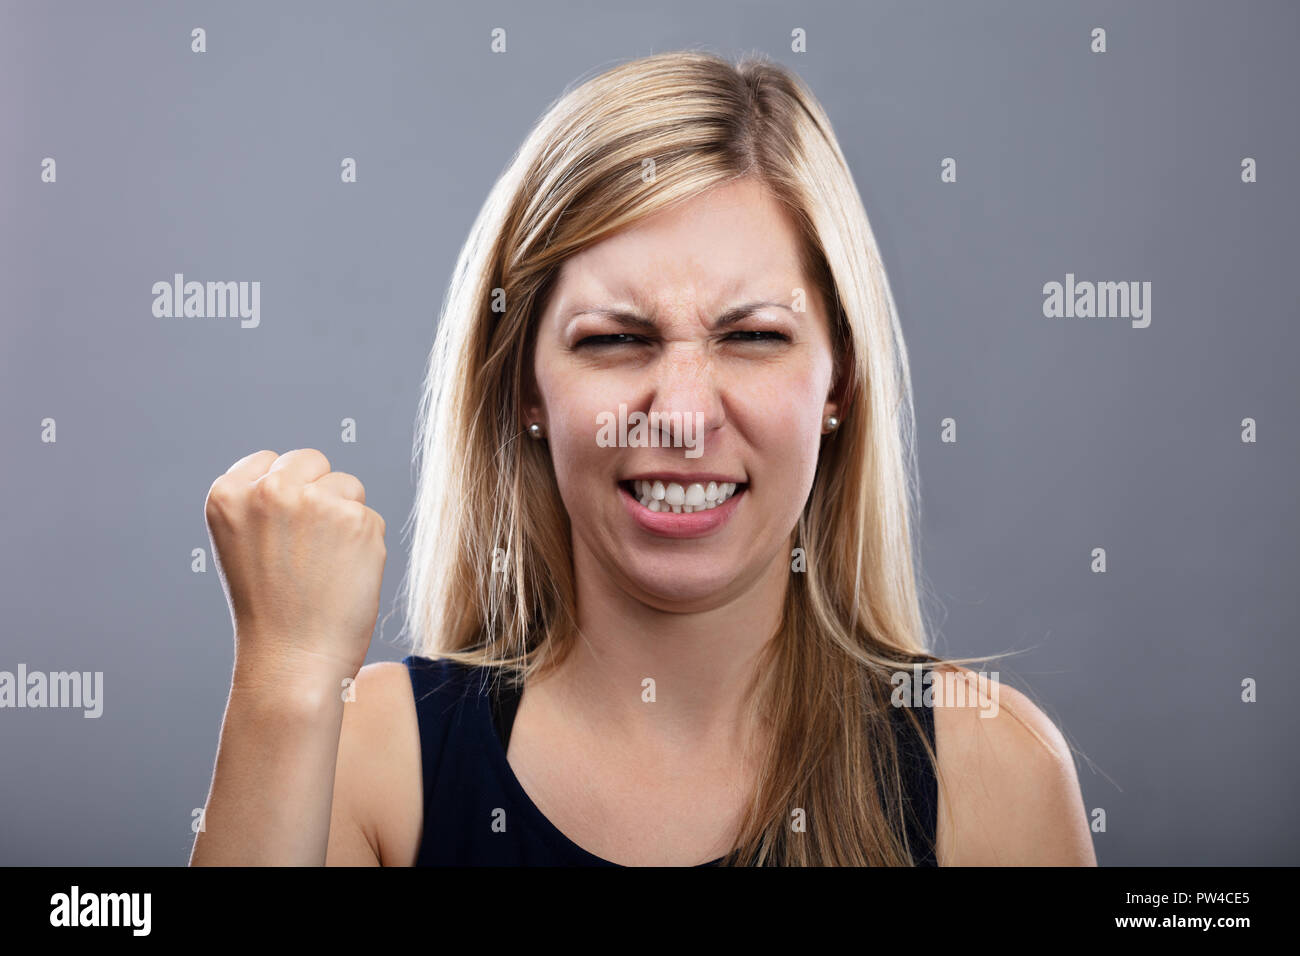 Photo Of Angry Young Woman On Grey Background Stock Photo